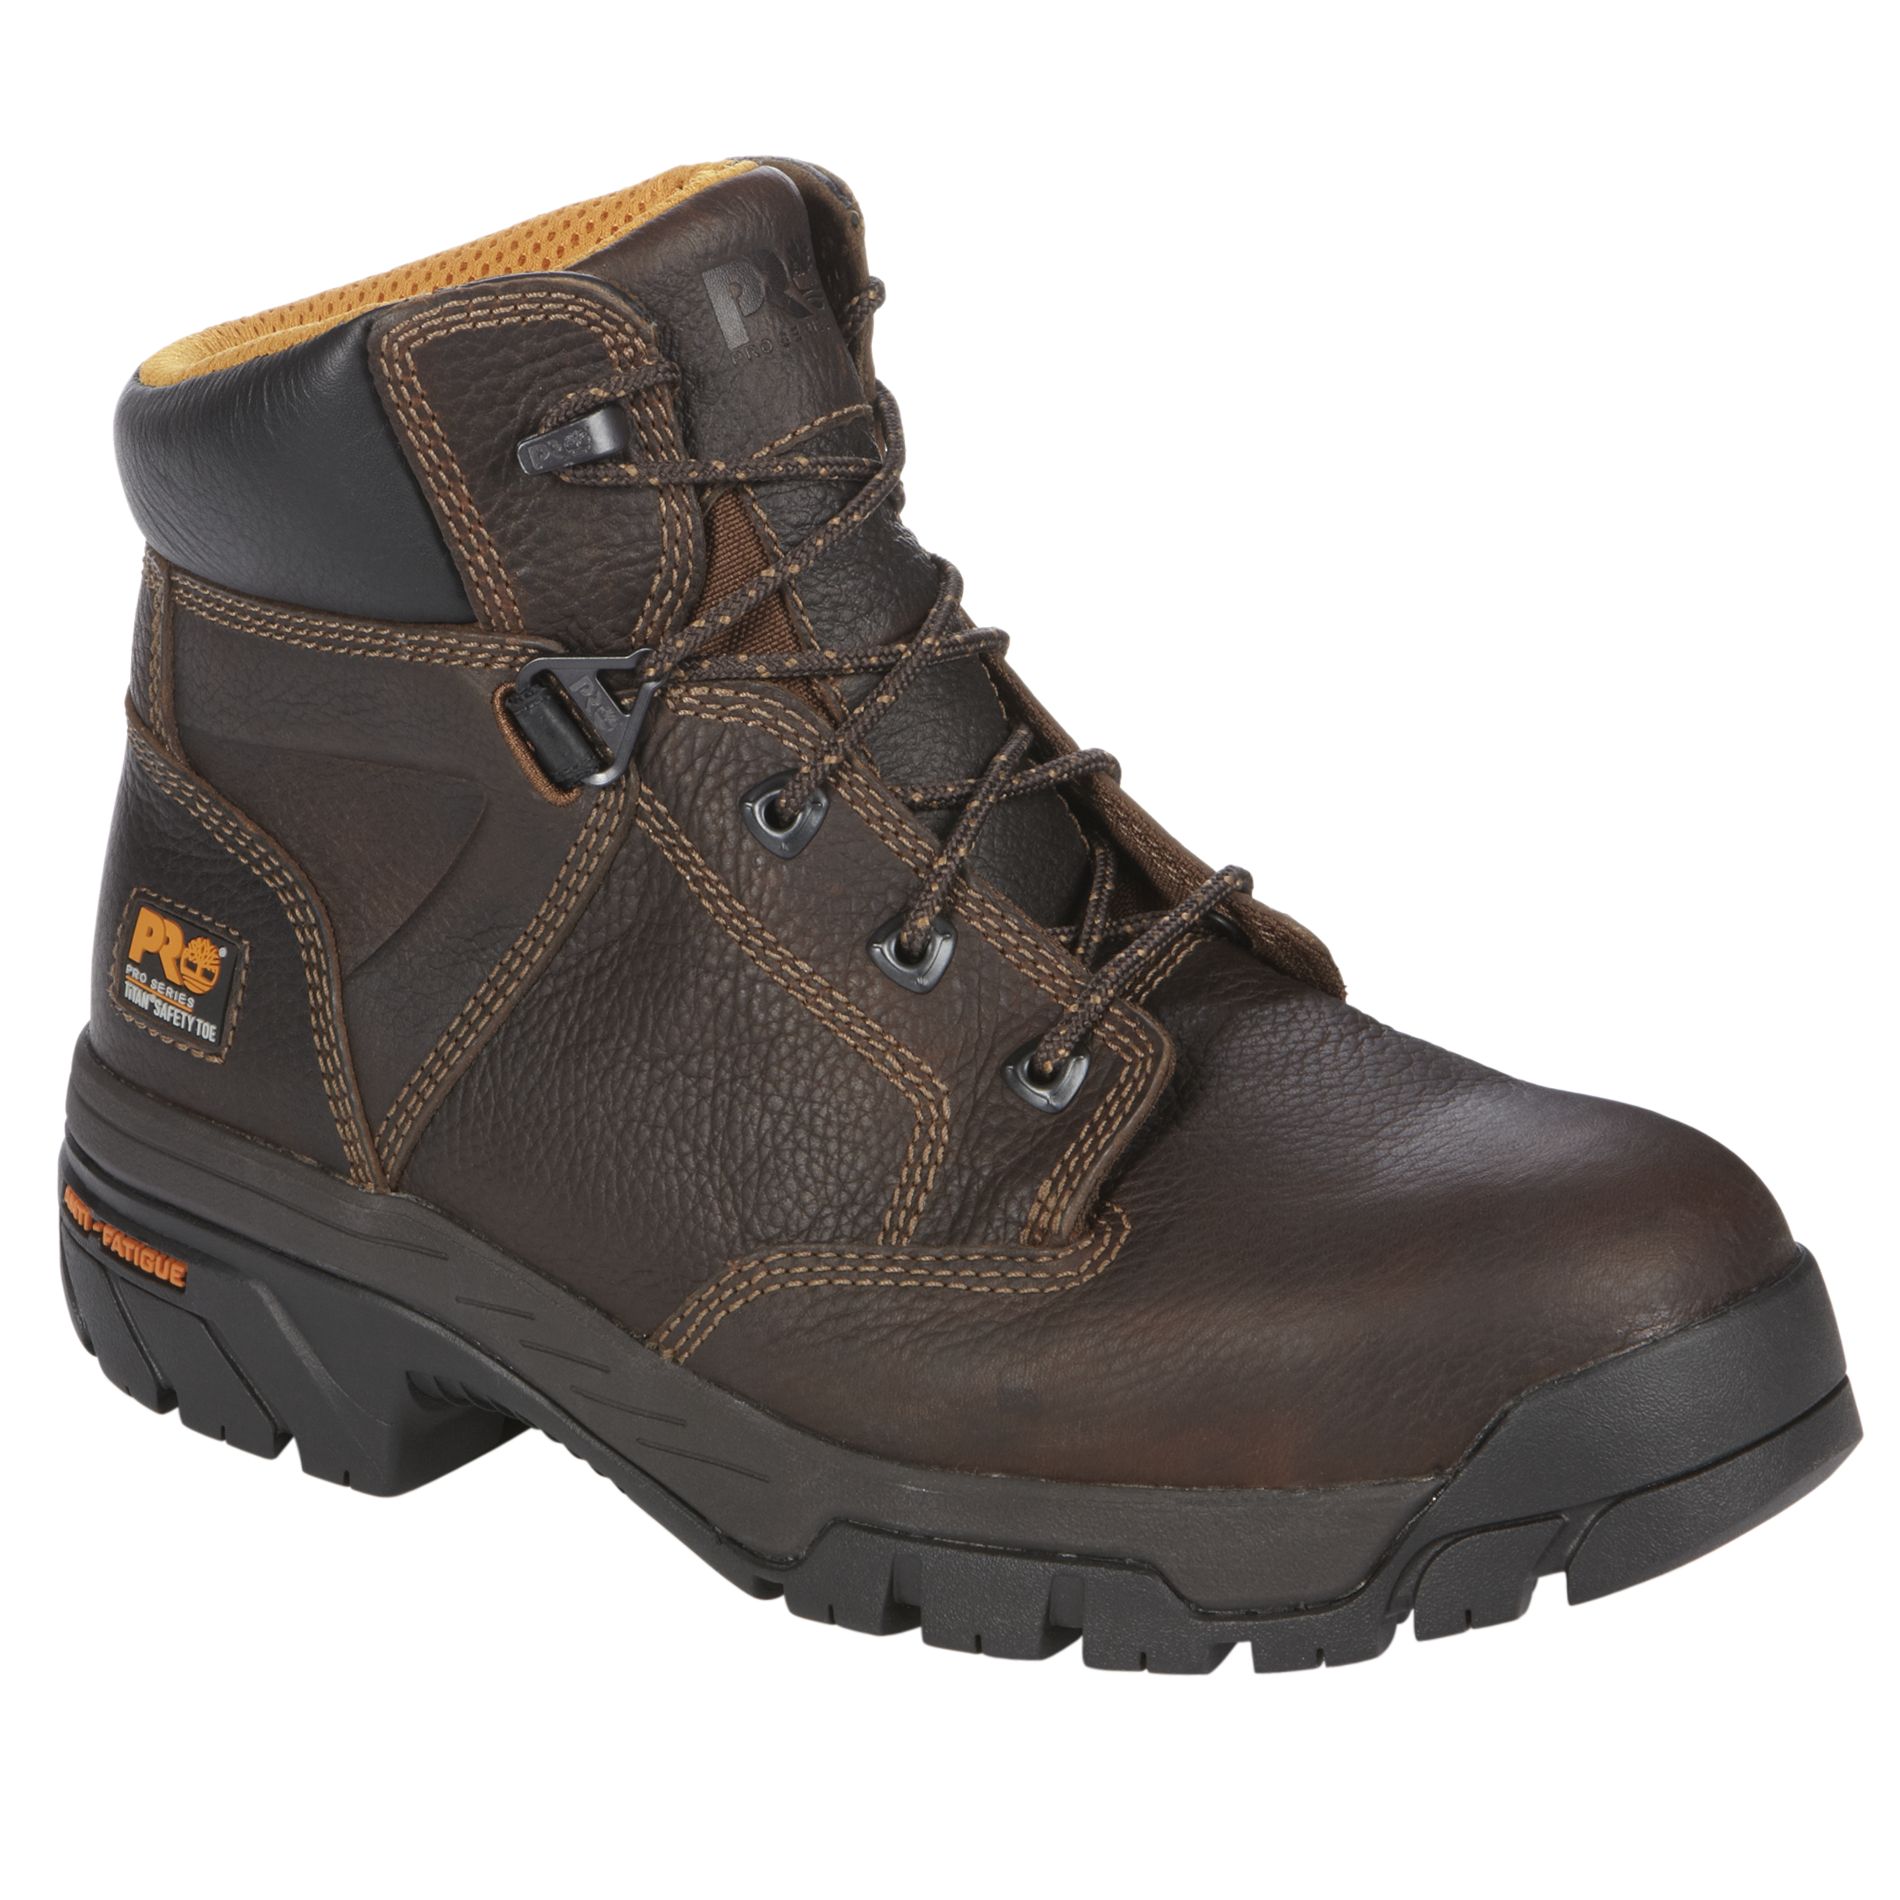 Timberland PRO Men's Work Boot 6" Helix Waterproof Safety Toe with Anti-Fatigue Technology - Brown